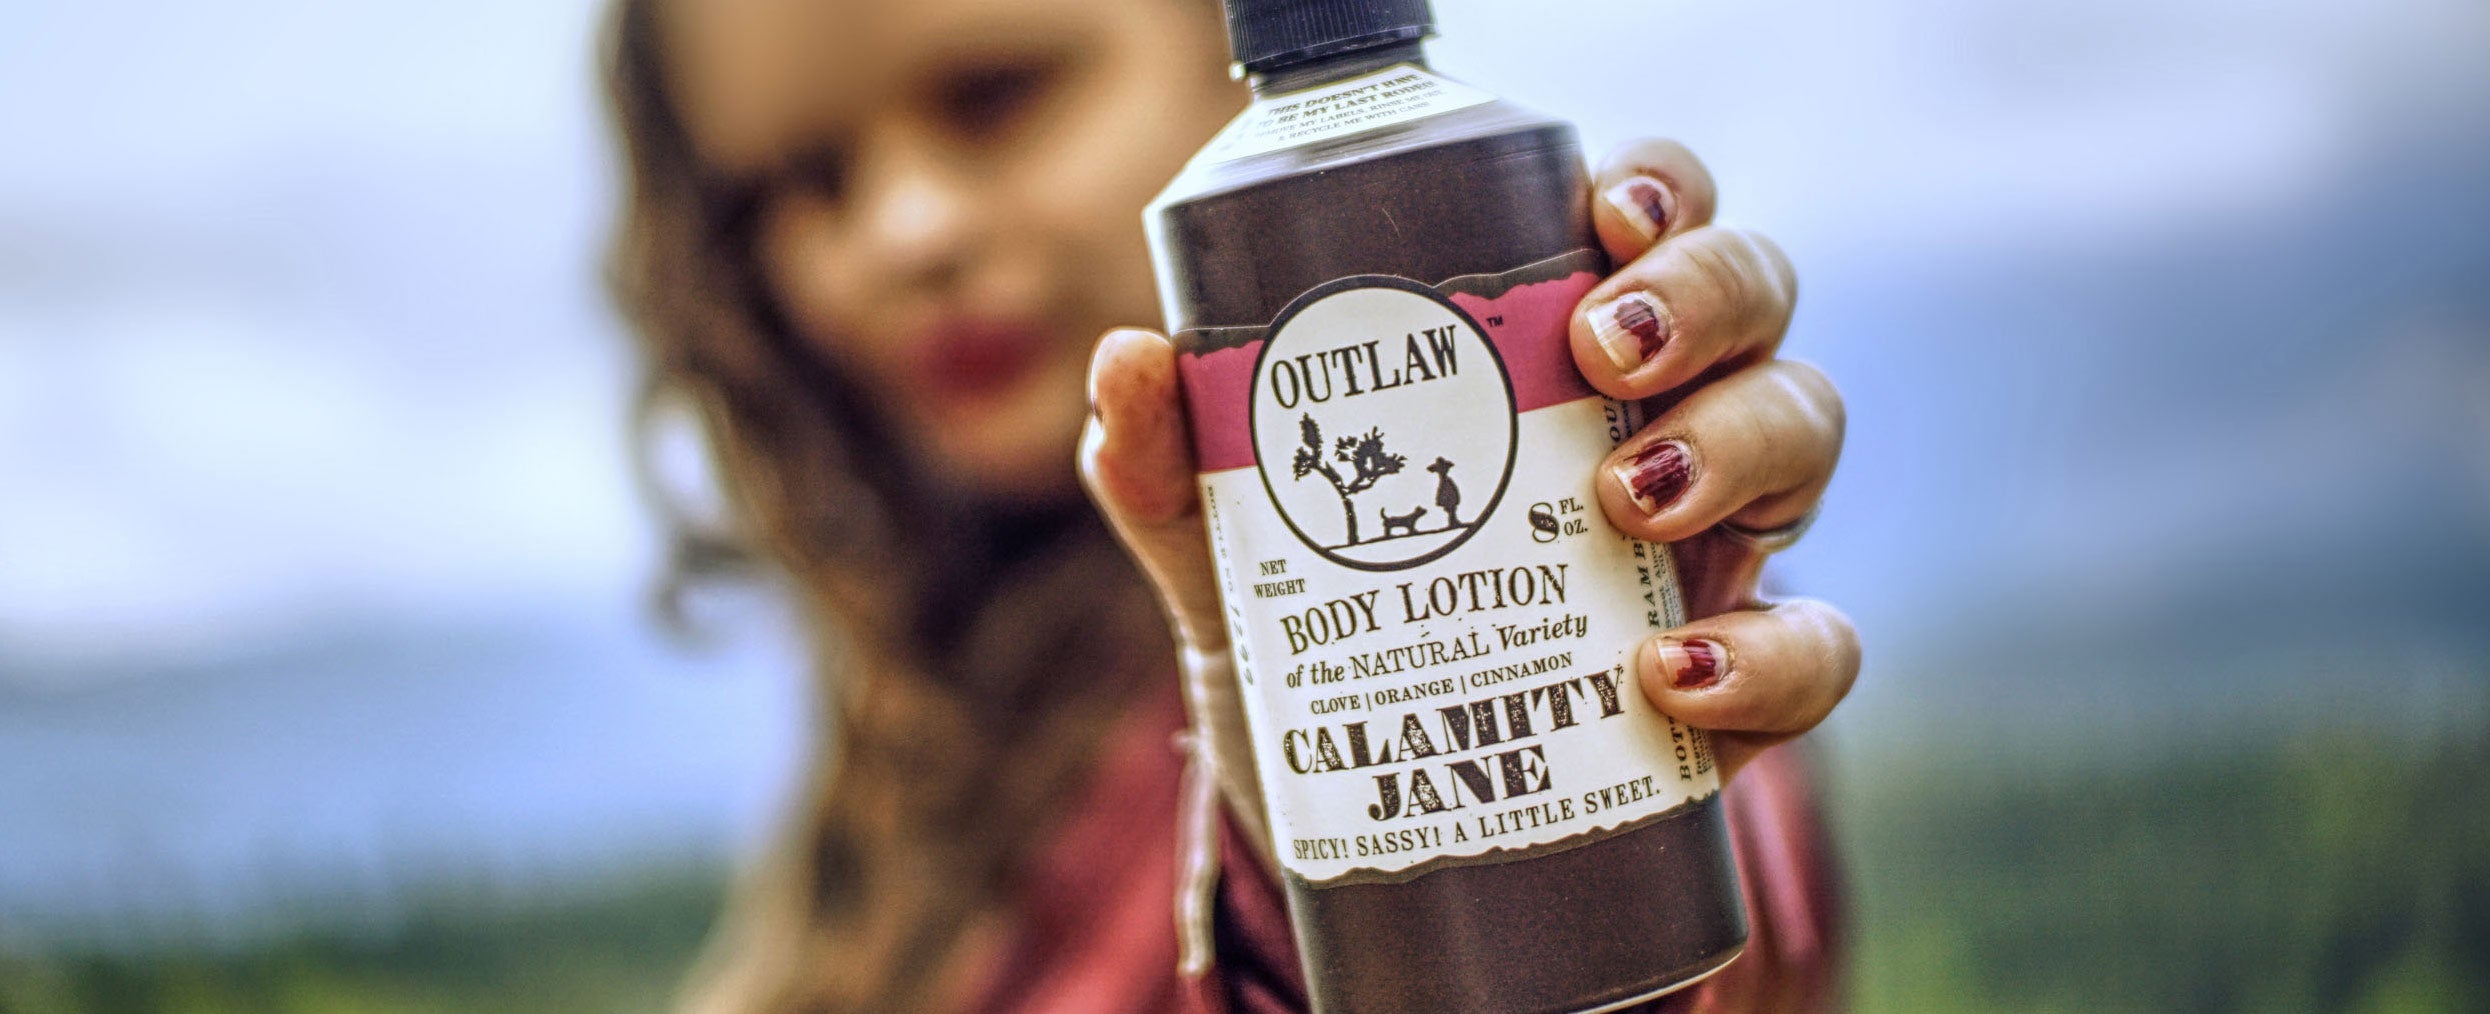 http://liveoutlaw.com/cdn/shop/collections/Outlaw-Calamity-Jane-Clove-Natural-Lotion-clove-orange-cinnamon-whiskey-outdoors-hand-web-resolution.jpg?v=1669669959